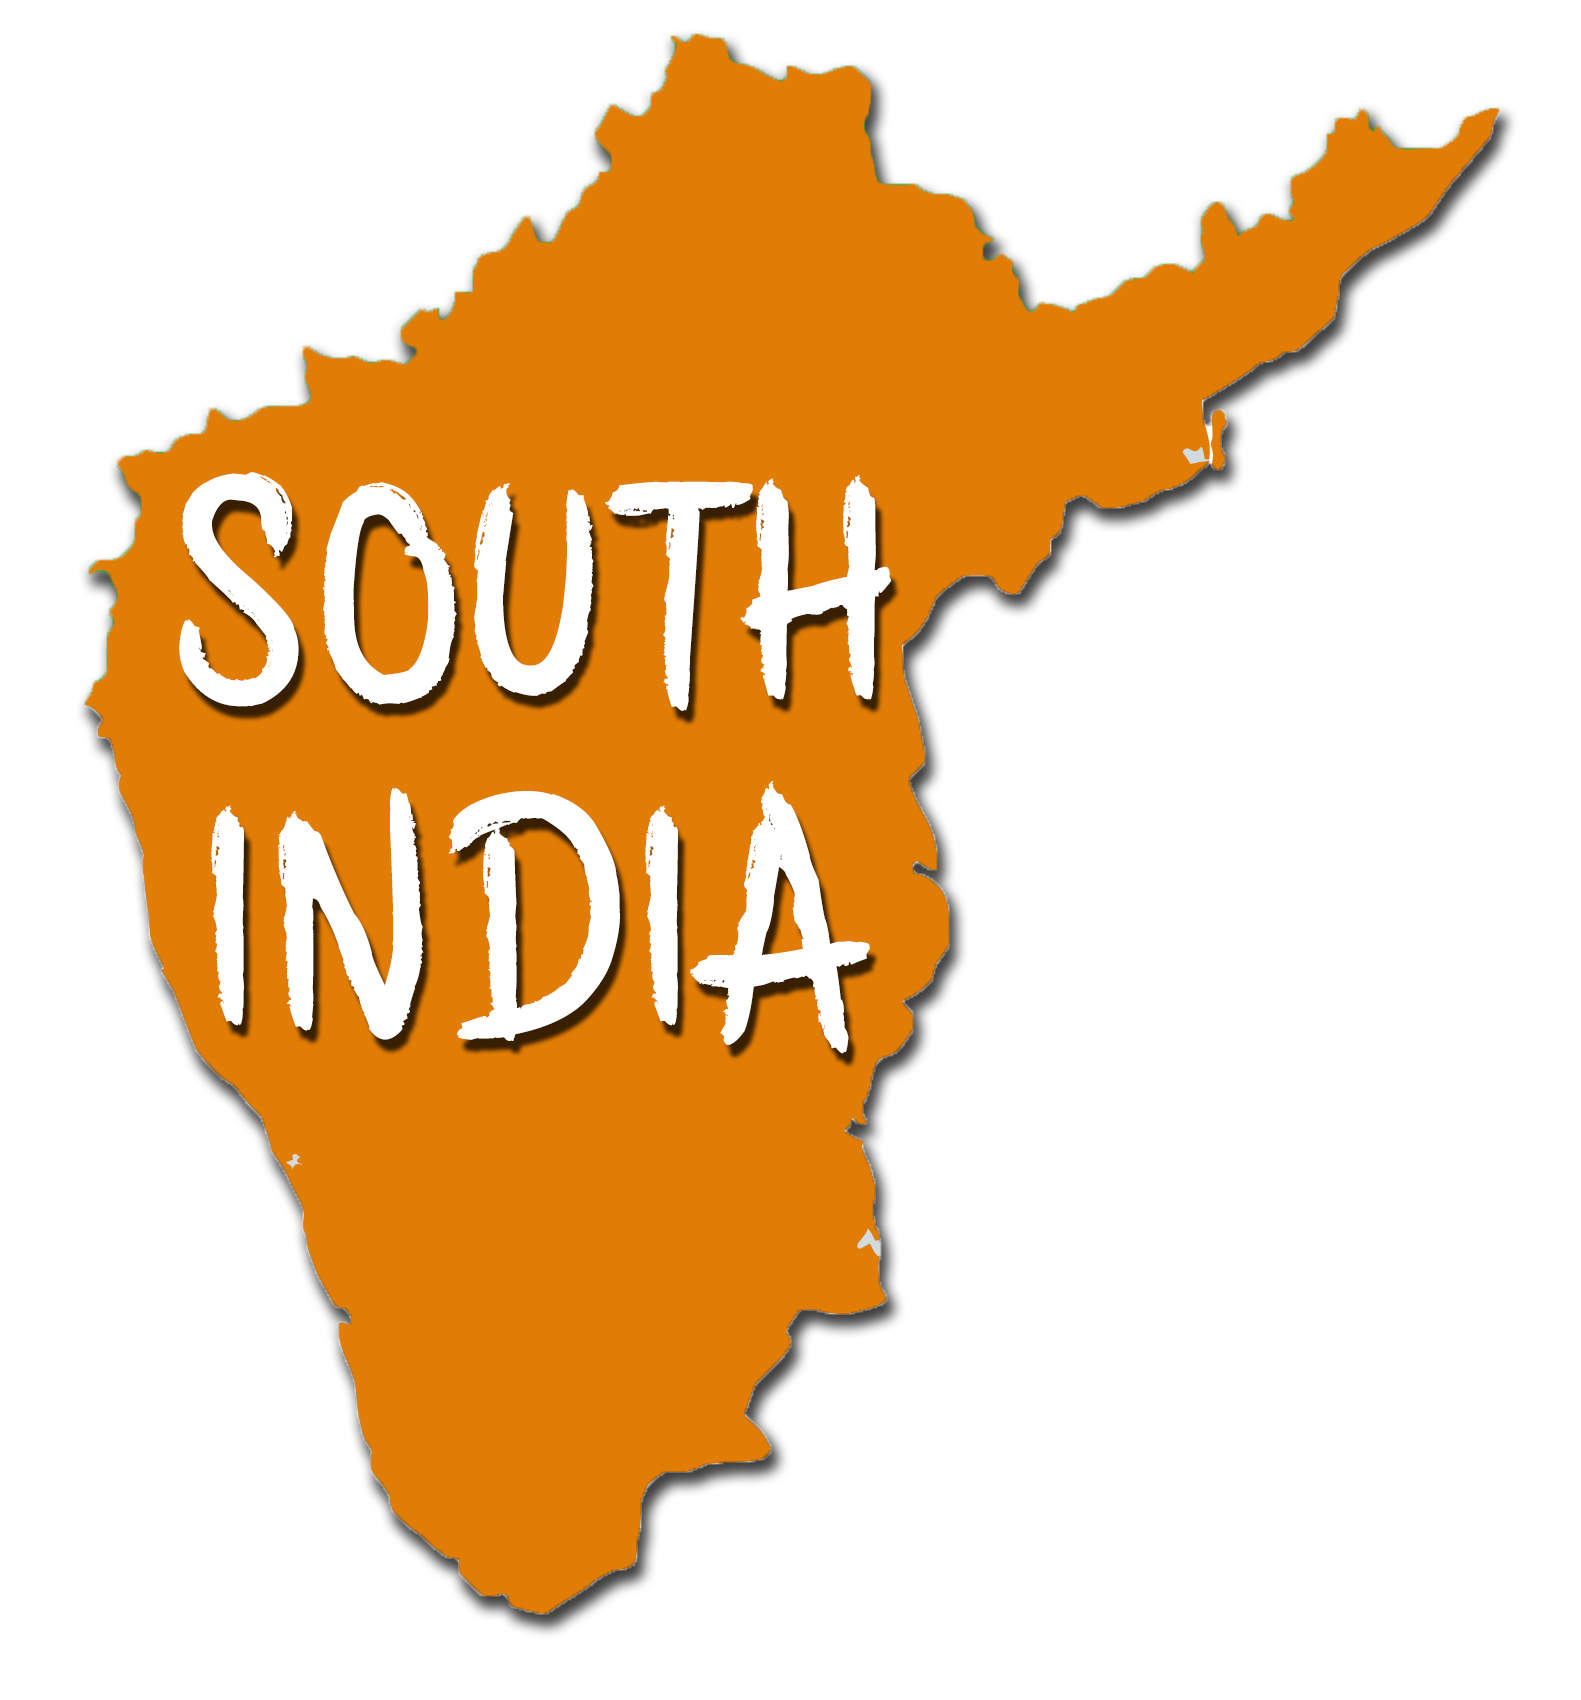 SOUTH india